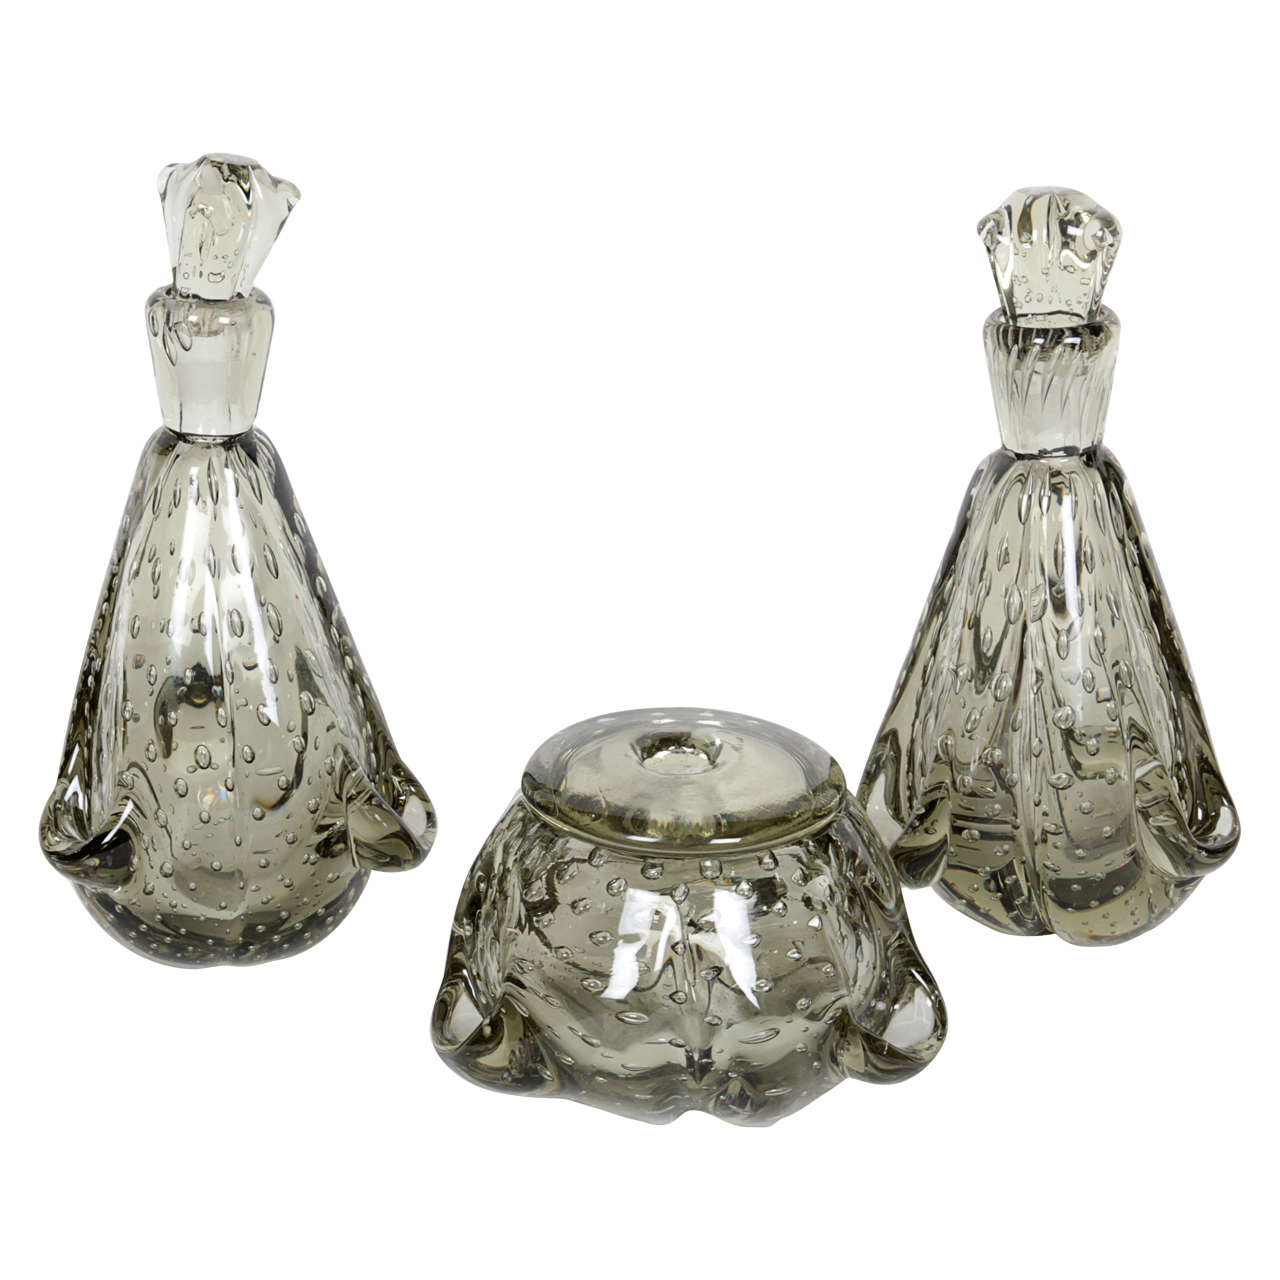 Exquisite Smoked Grey Murano Glass, Vanity or Perfume Set by Barovier & Toso